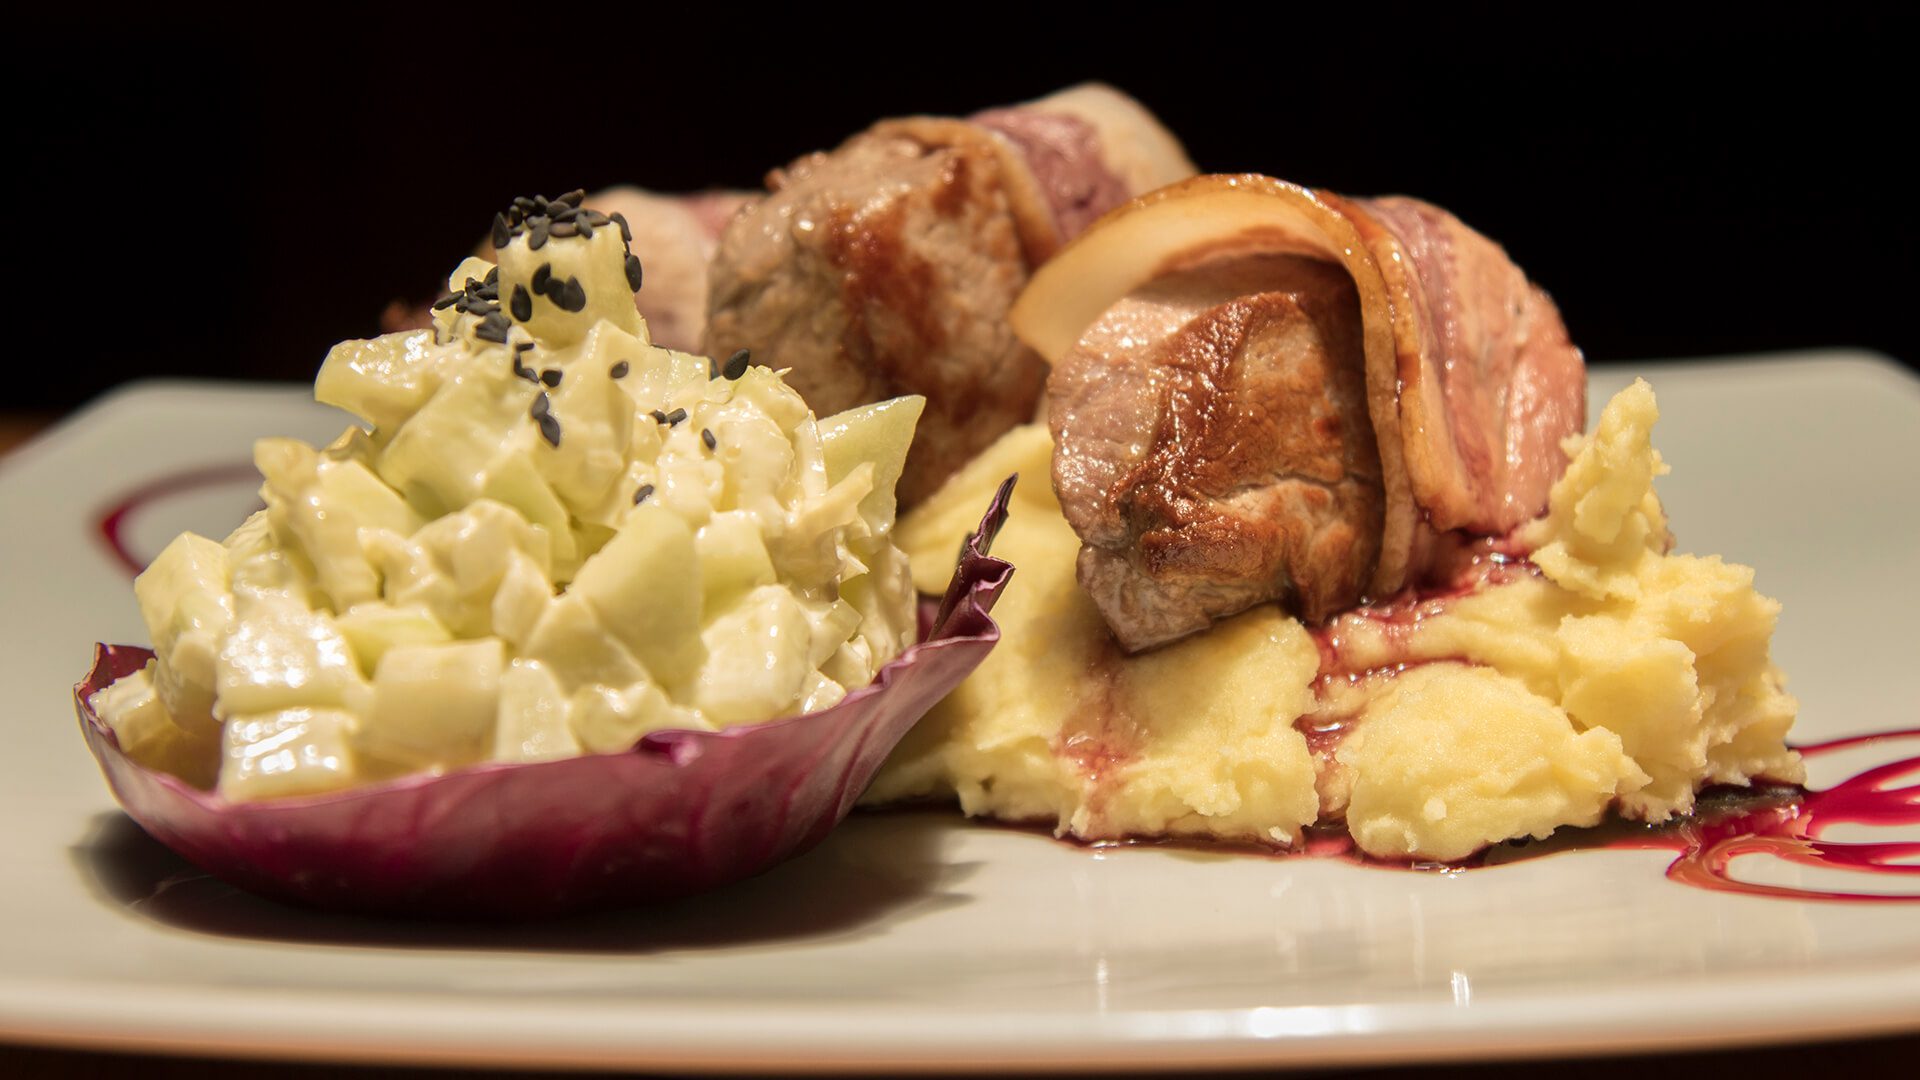 Alpaca and bacon with complementary mash potato and salad | RESPONSible Travel Peru